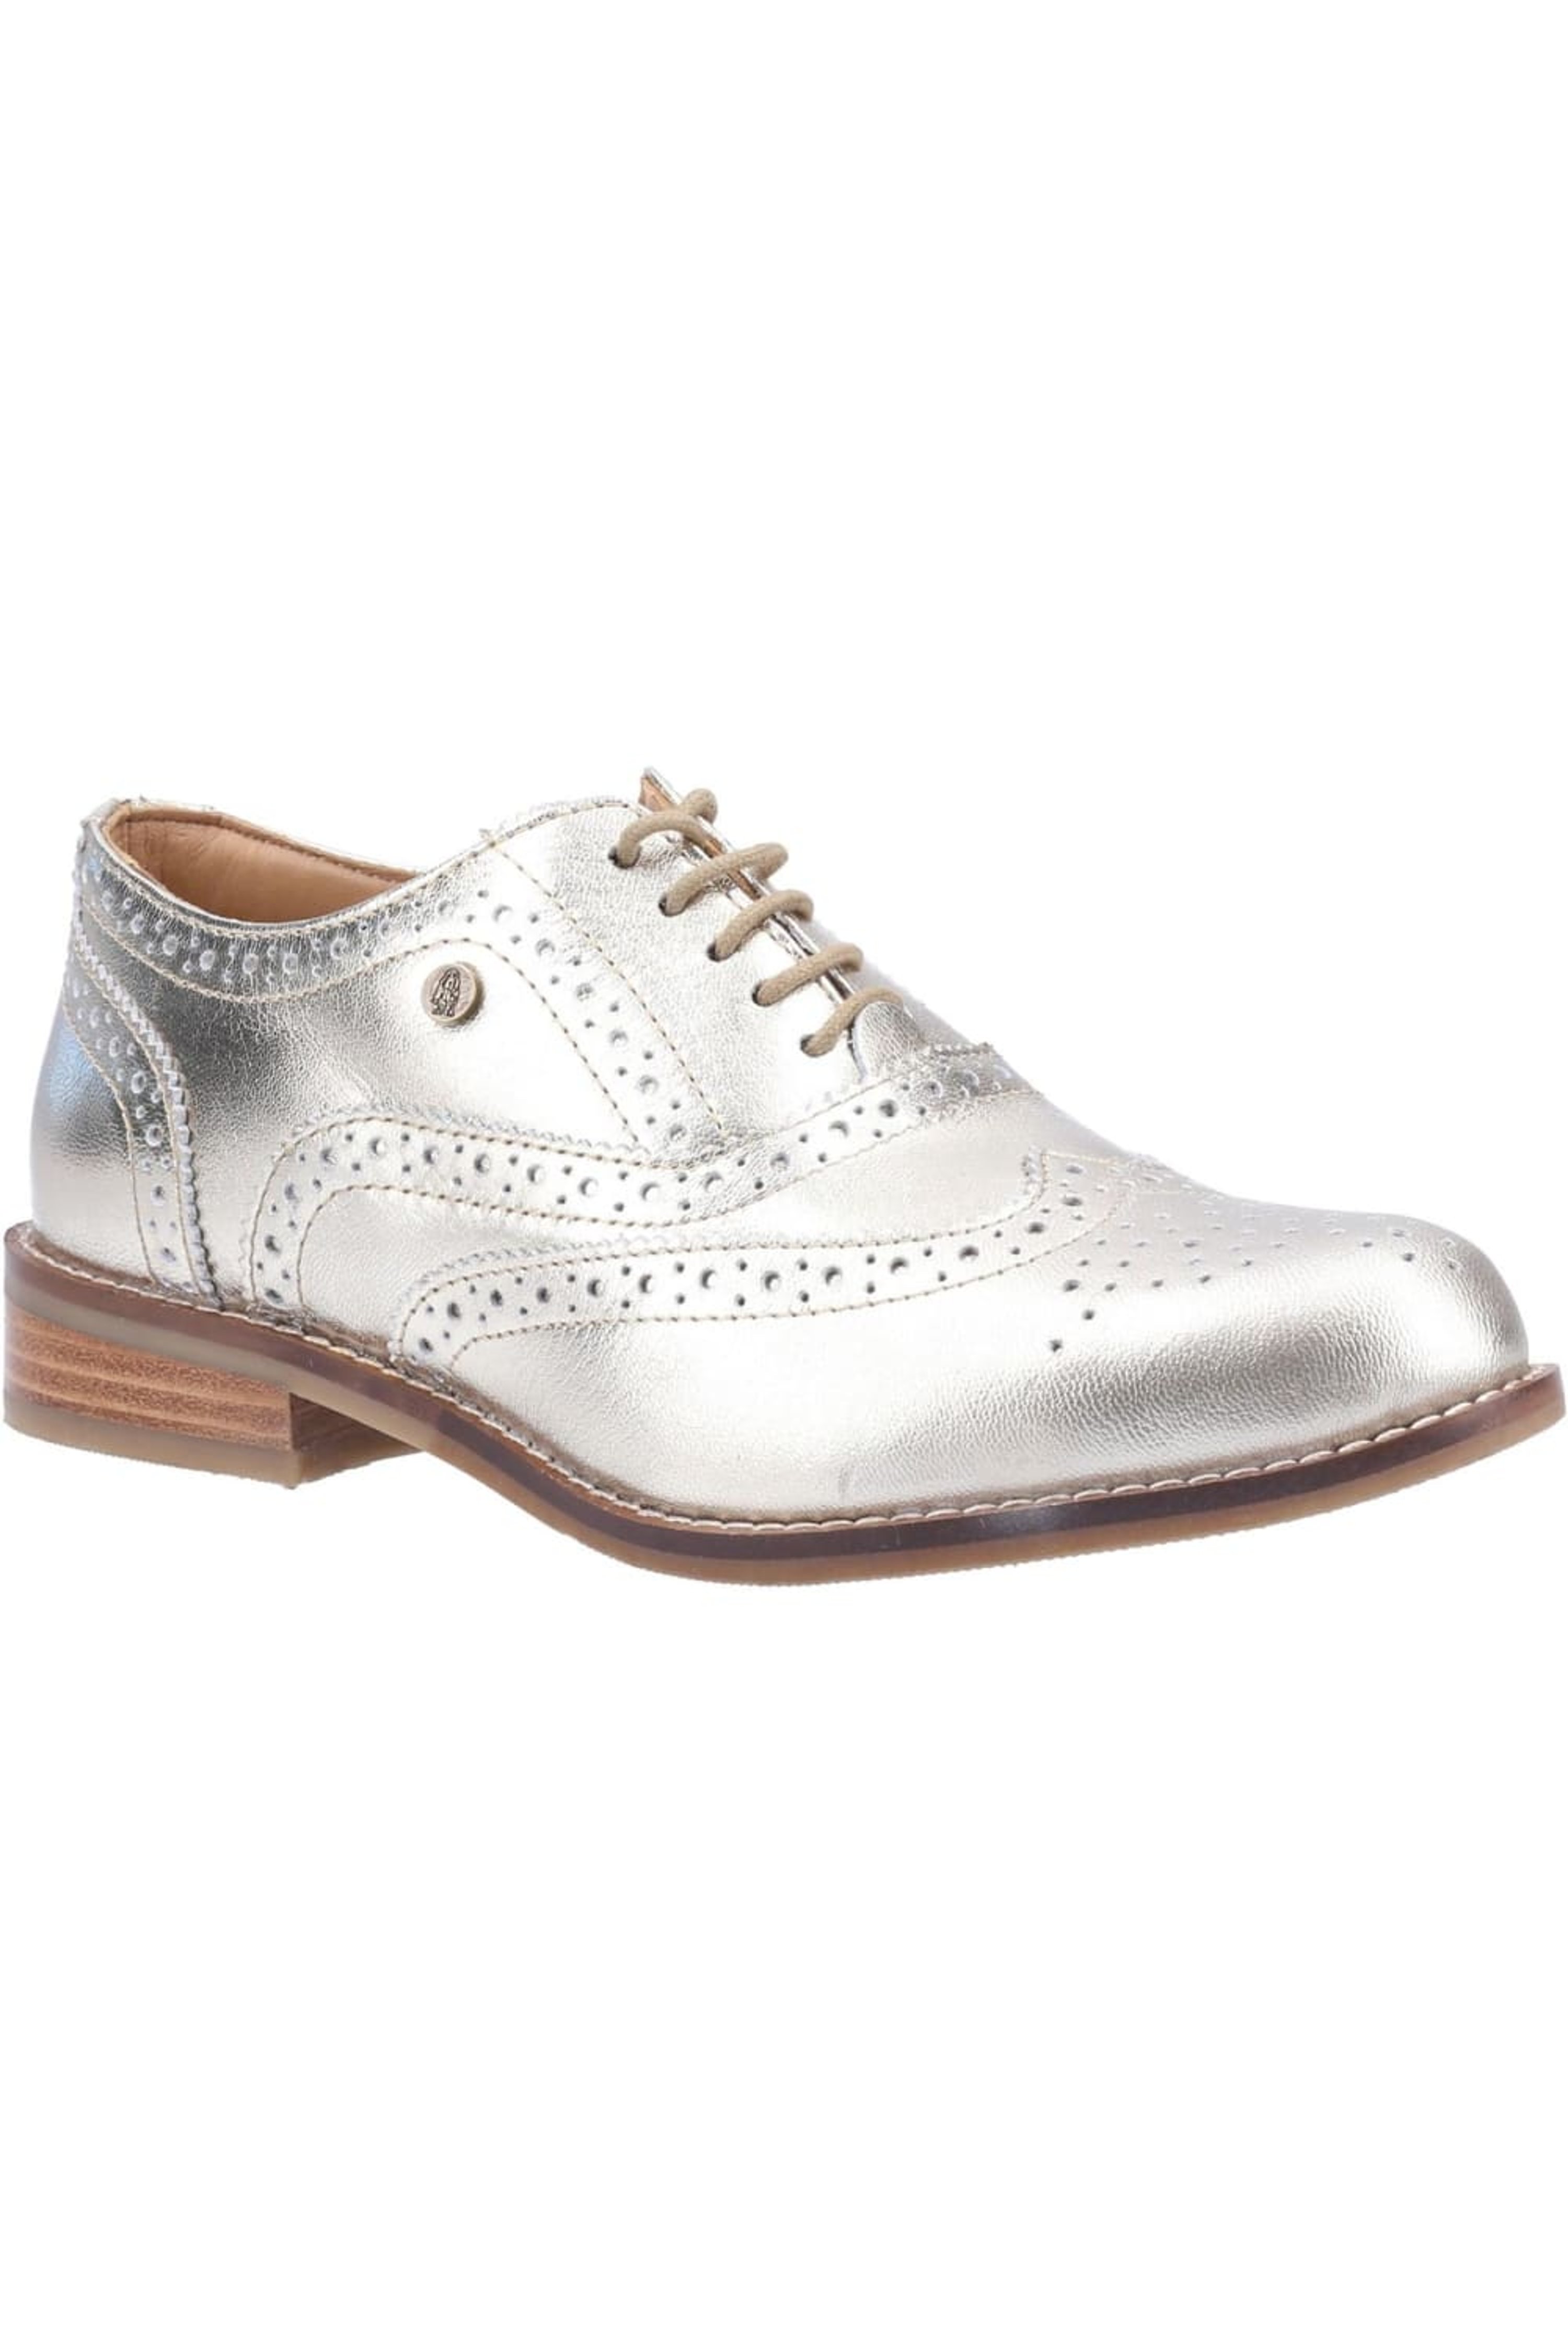 HUSH PUPPIES HUSH PUPPIES HUSH PUPPIES WOMENS/LADIES NATALIE LACE UP LEATHER BROGUE SHOE (GOLD)